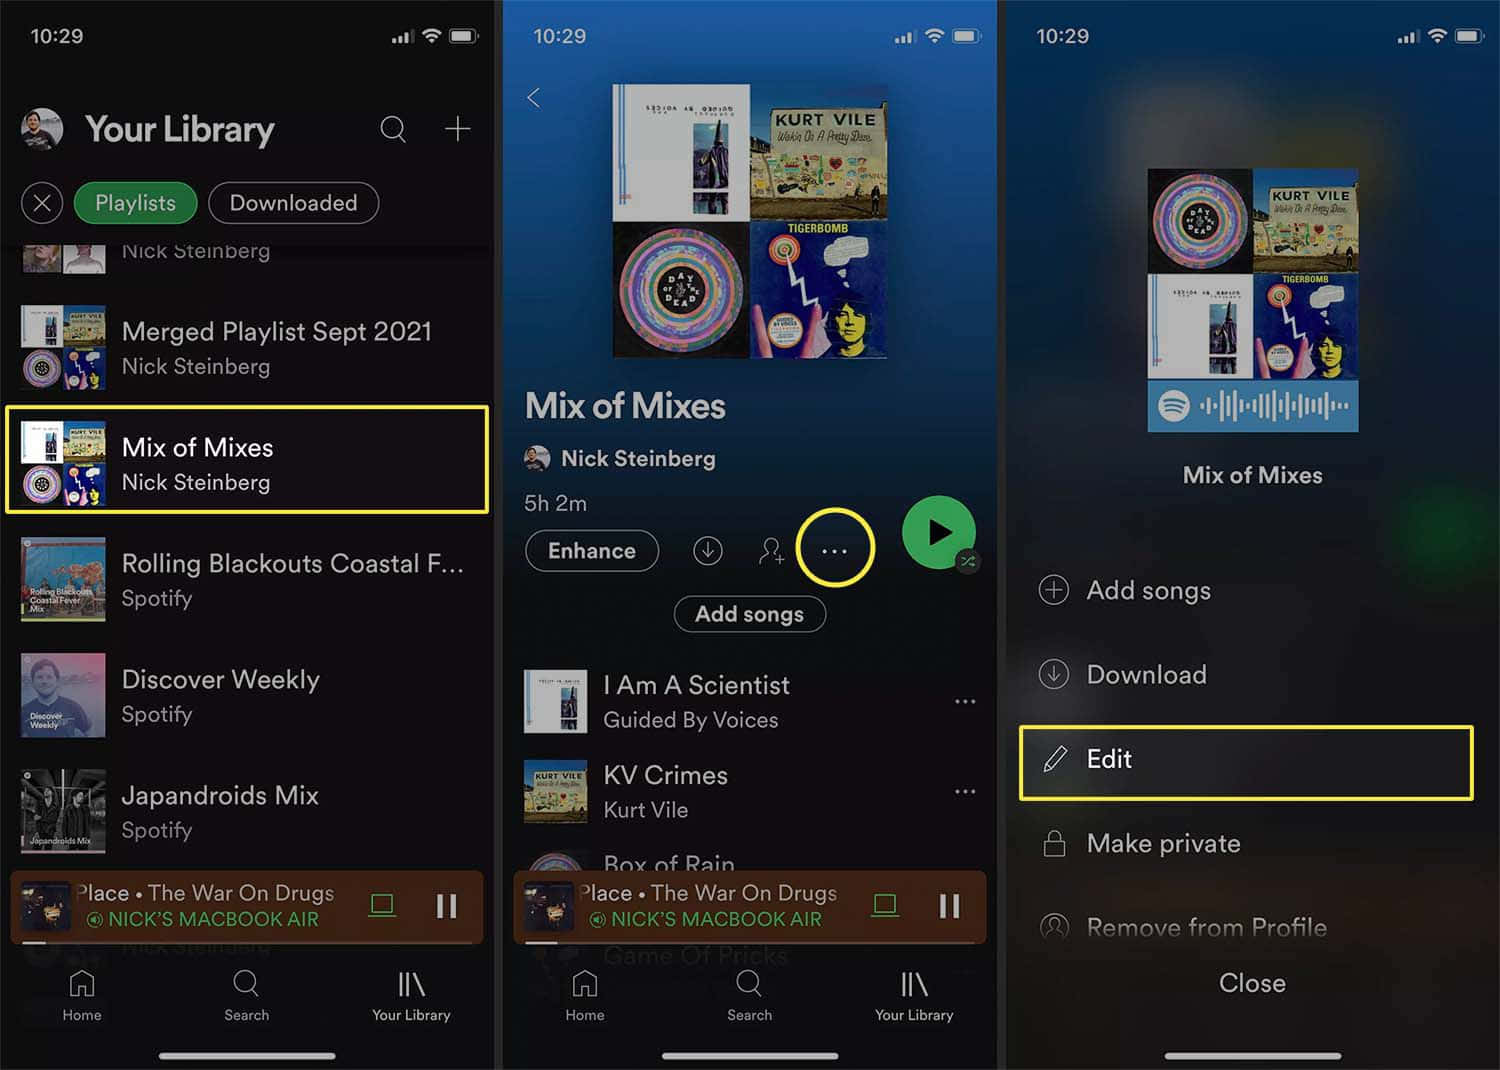 How To Change The Background Of The Music Player On Your Iphone